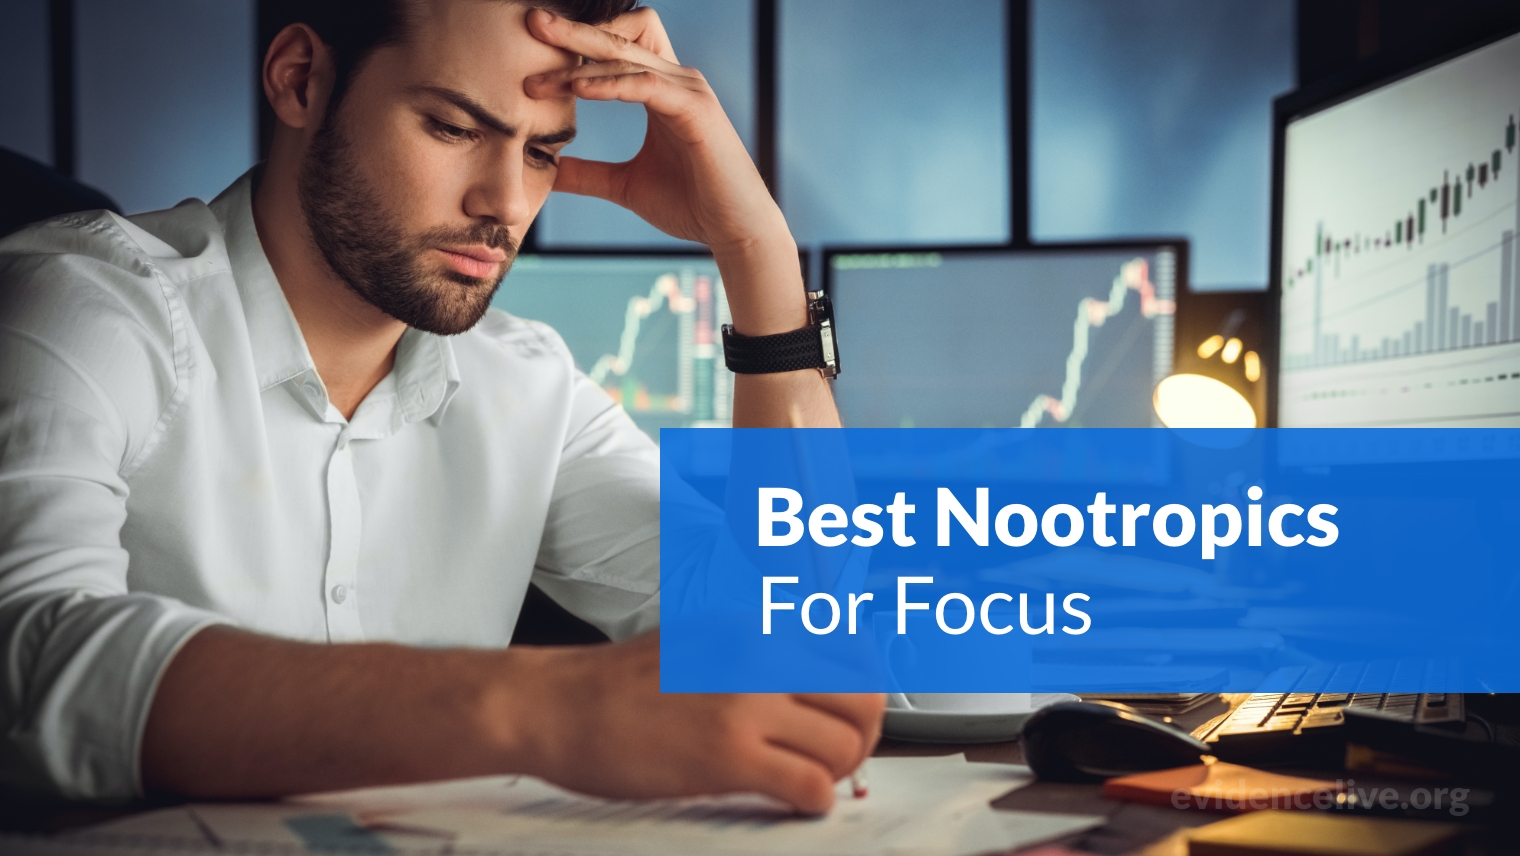 Best Nootropics For Focus, Mental Clarity, and Concentration